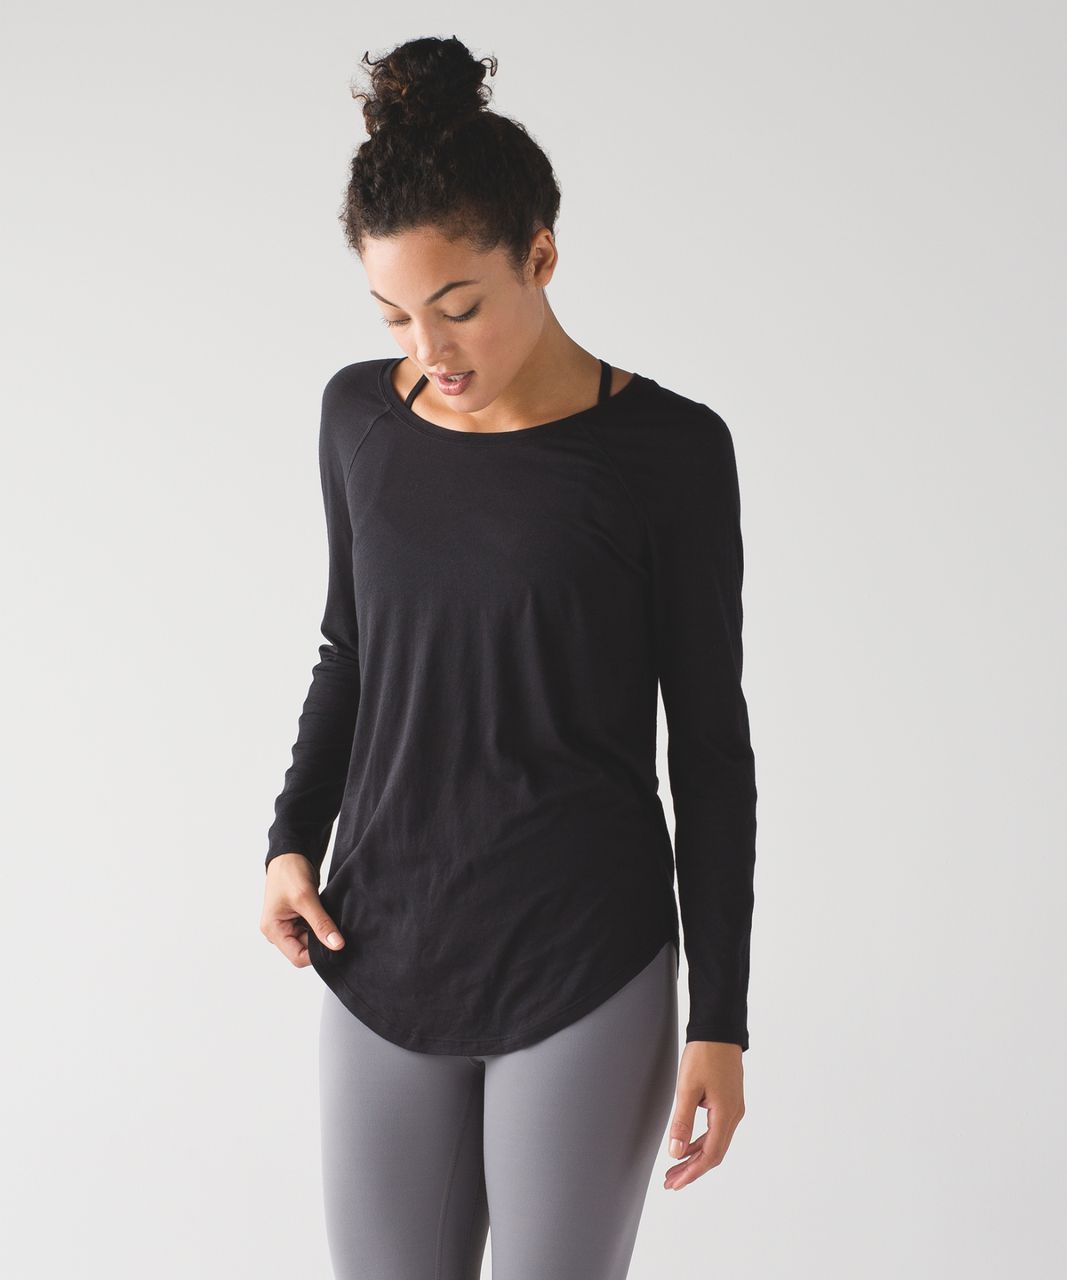 Lululemon Womens Black Long Sleeve Shirt Relaxed fit Size 6 Pit-18